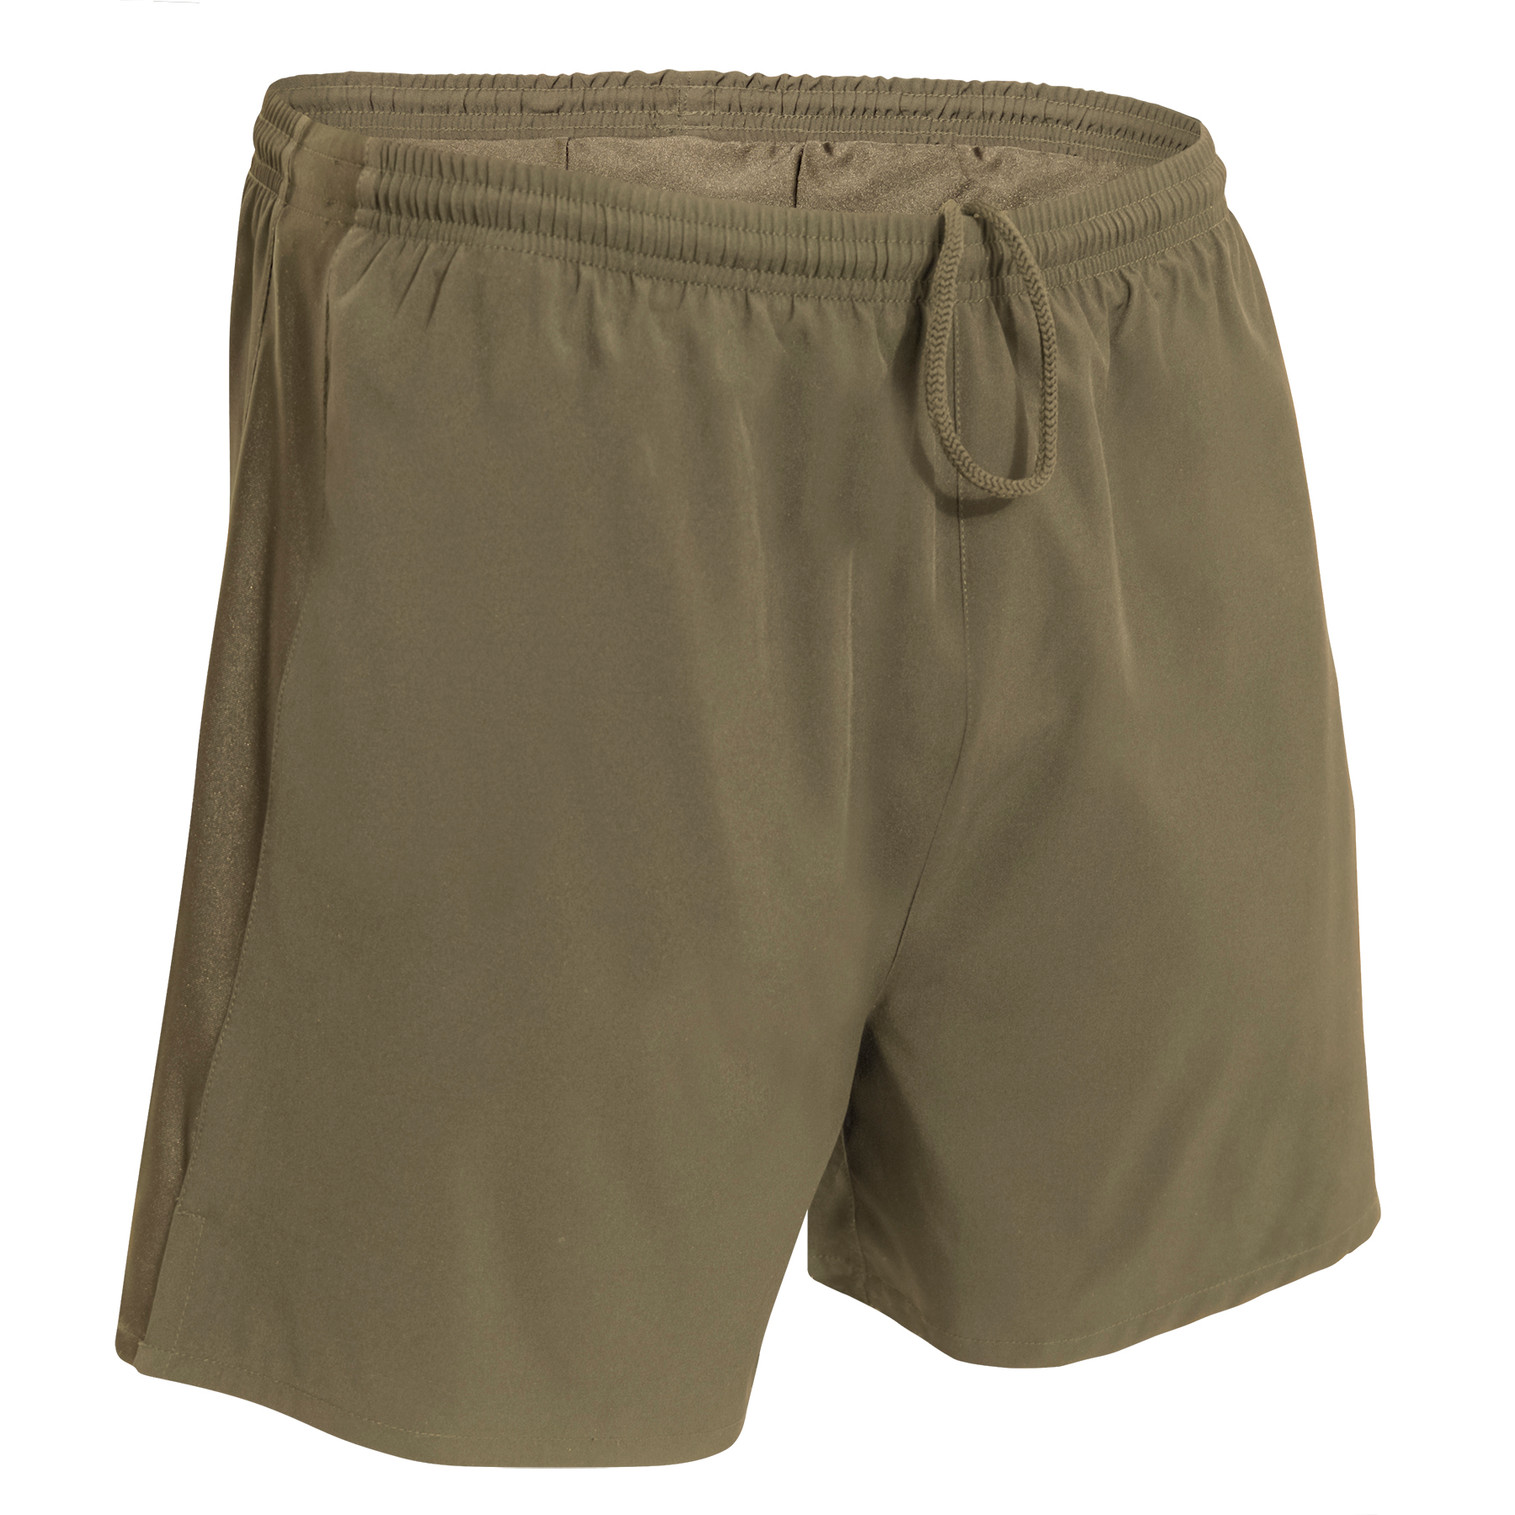 Rothco Physical Training PT Shorts -Coyote Brown